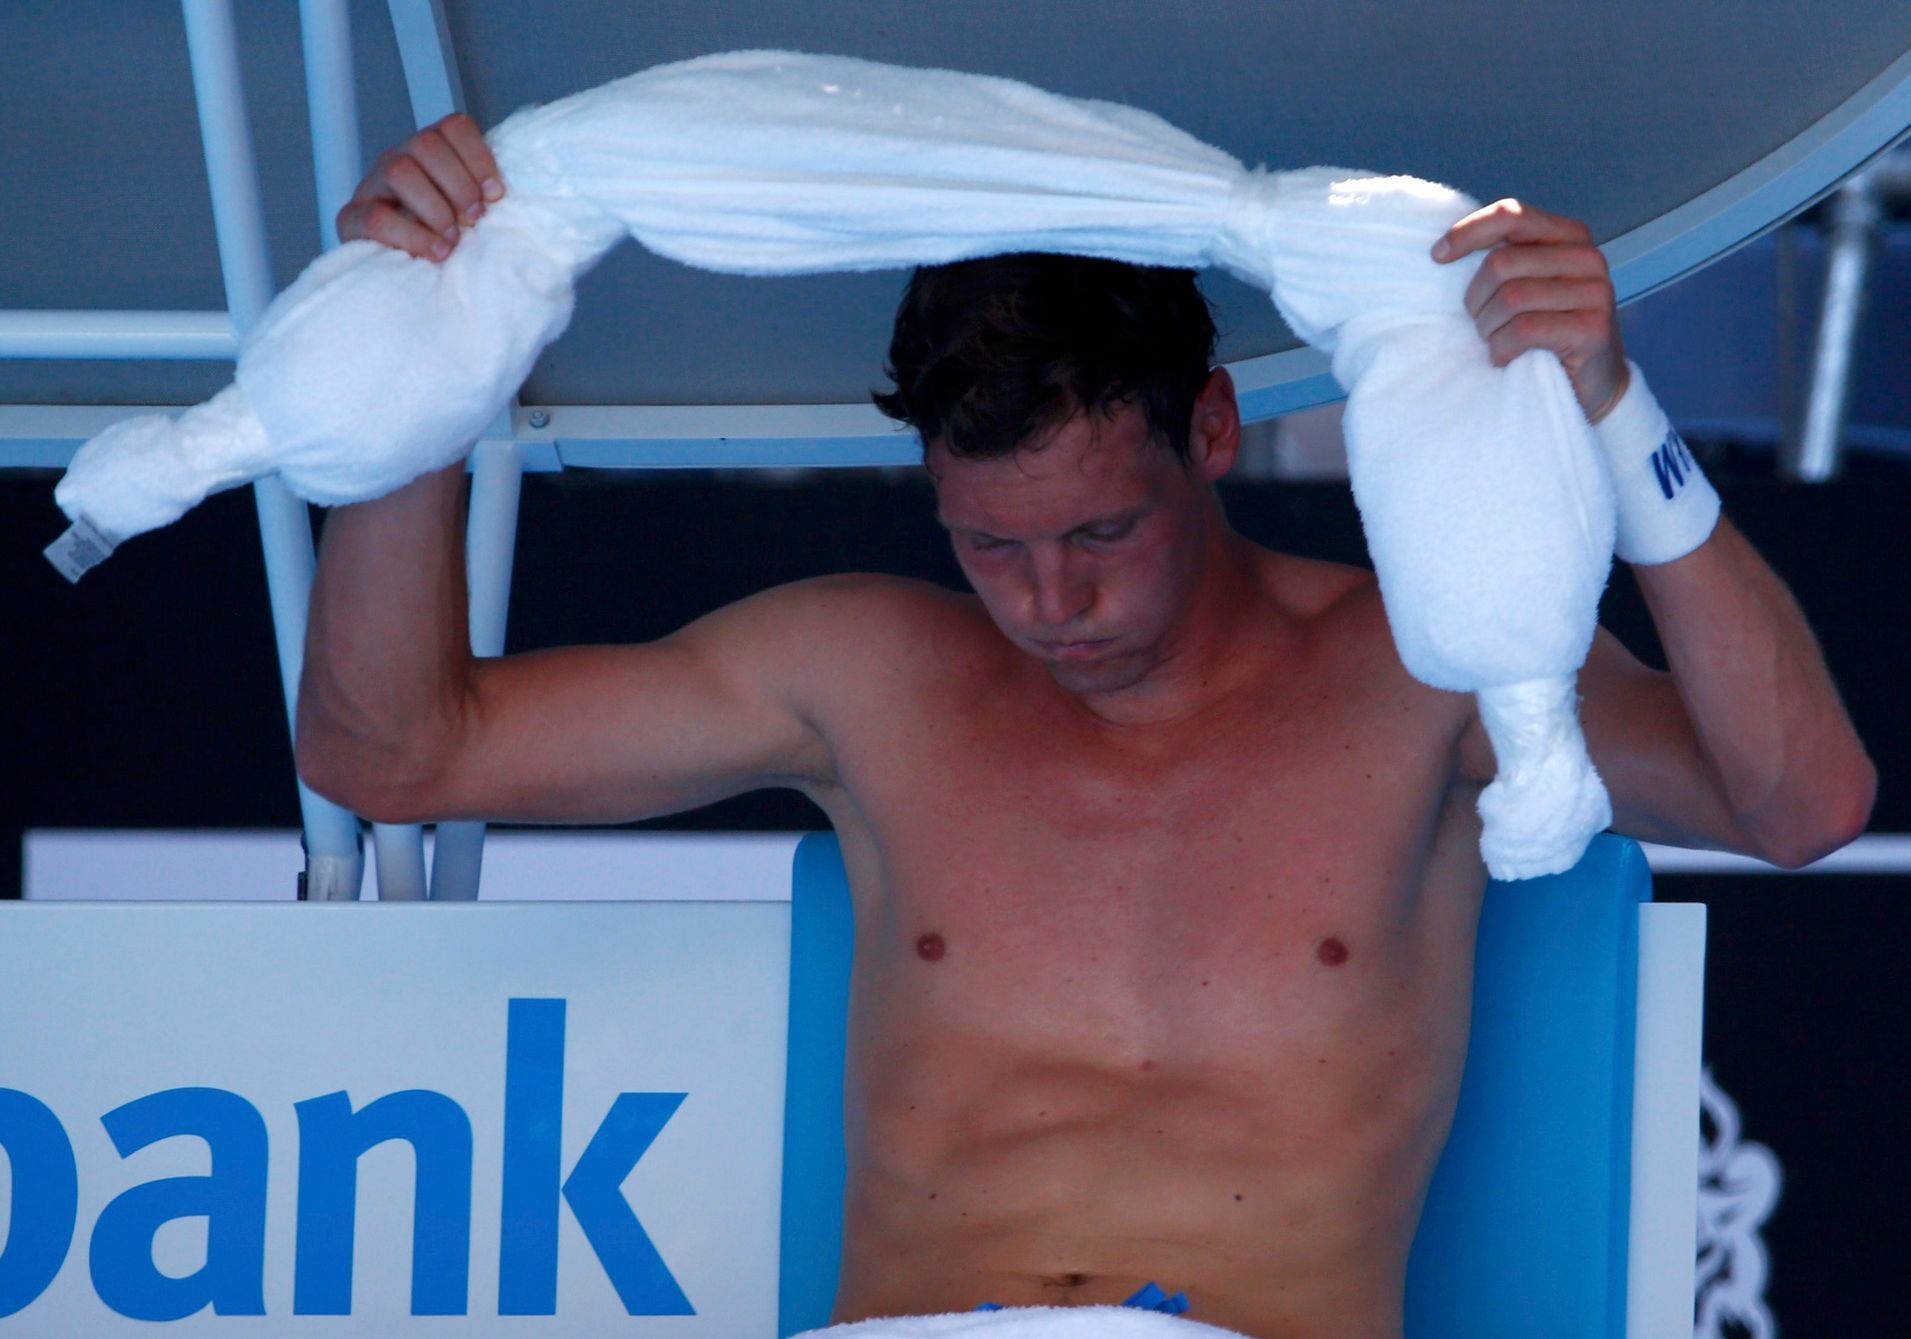 Tomas Berdych of Czech Republic holds an ice-packed towel during his men's singles match against Damir Dzumhur of Bosnia and Herzegovina at the Australian Open 2014 tennis tournament in Melbourne